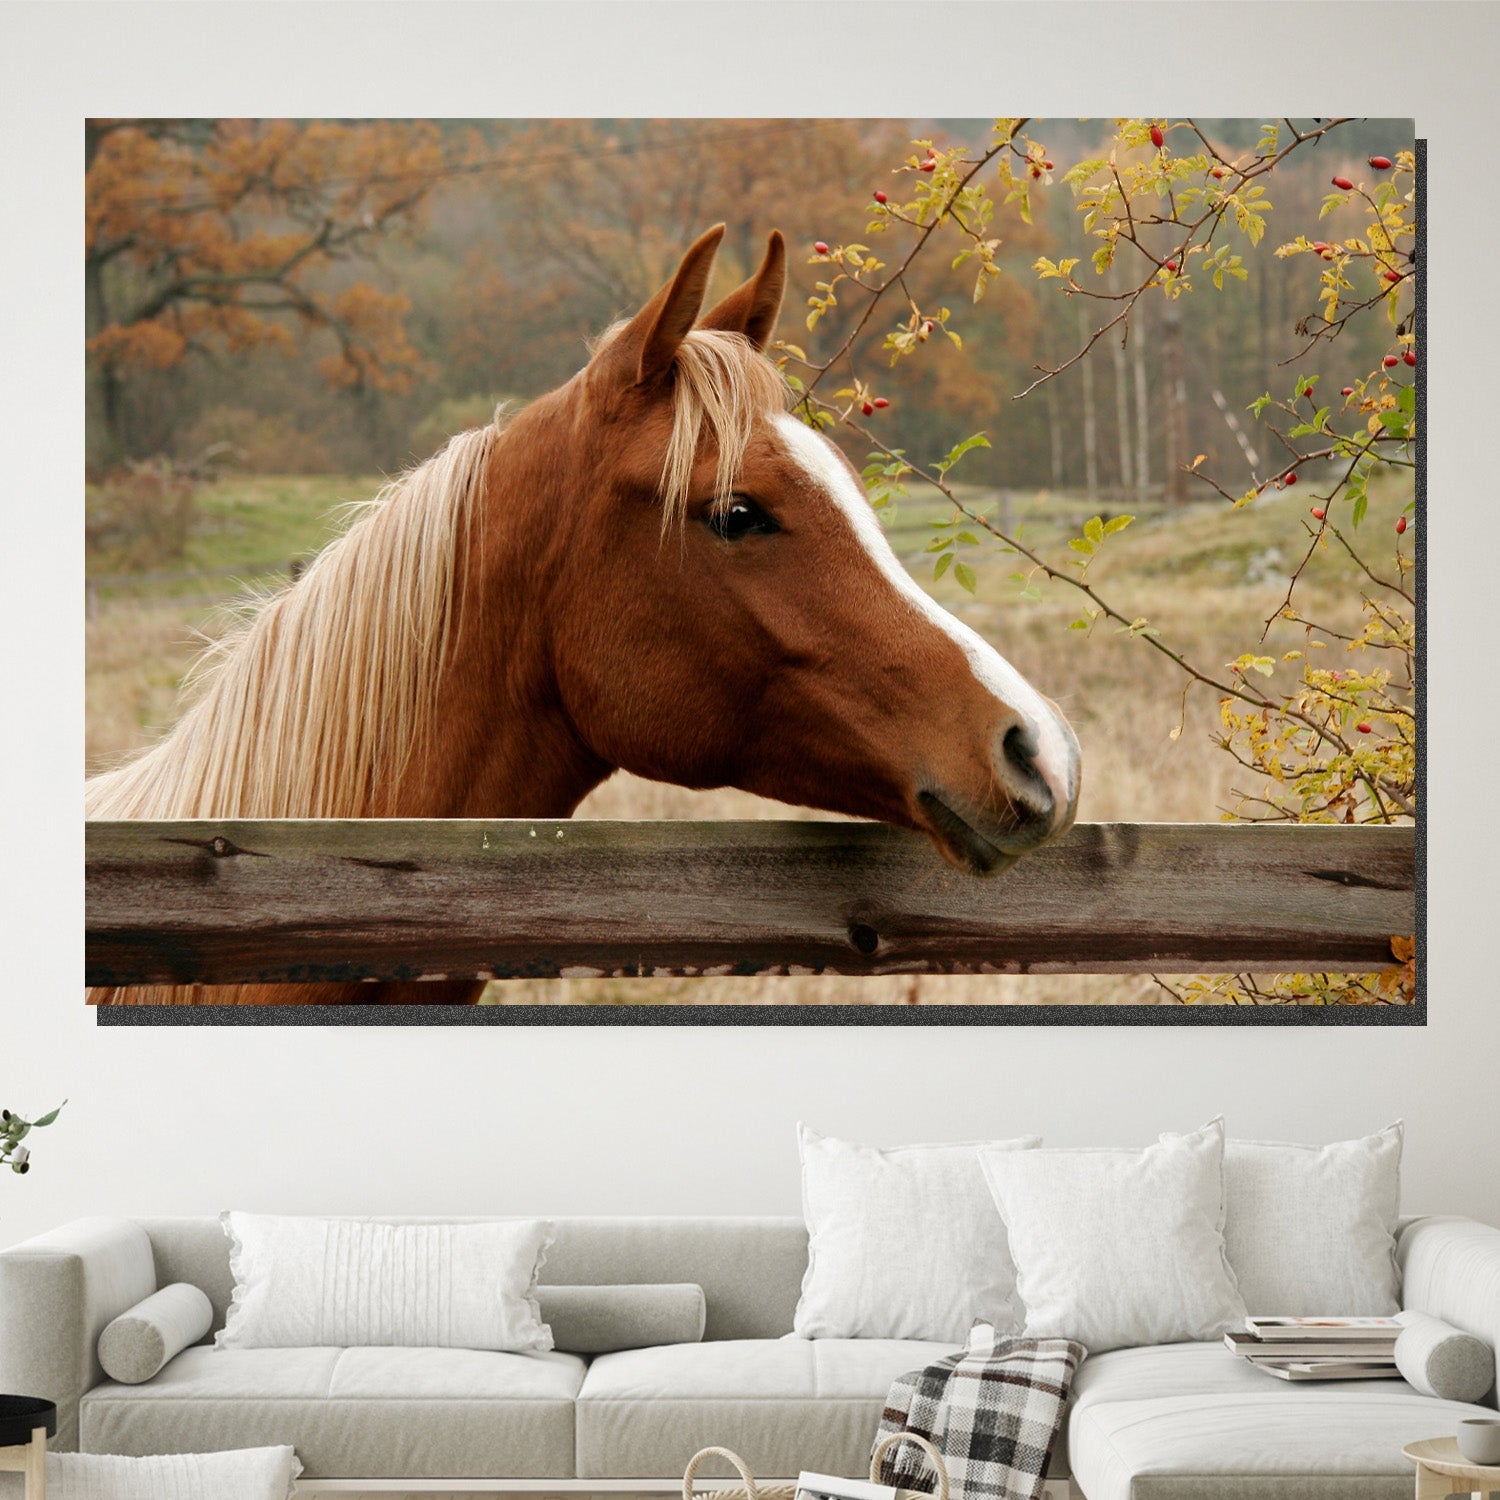 https://cdn.shopify.com/s/files/1/0387/9986/8044/products/CountryHorseCanvasArtprintStretched-3.jpg